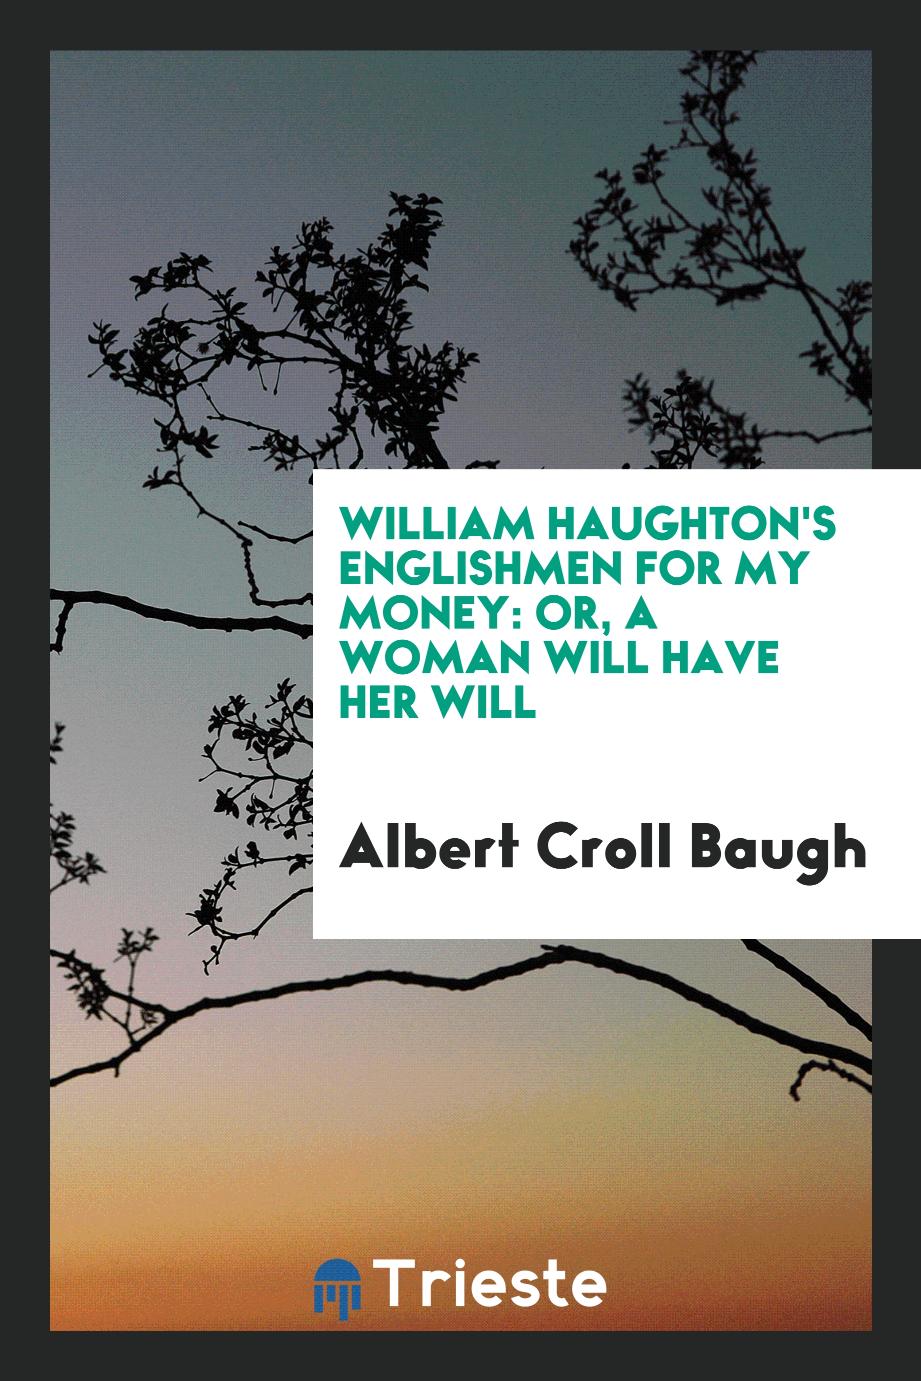 William Haughton's Englishmen for my money: or, A woman will have her will